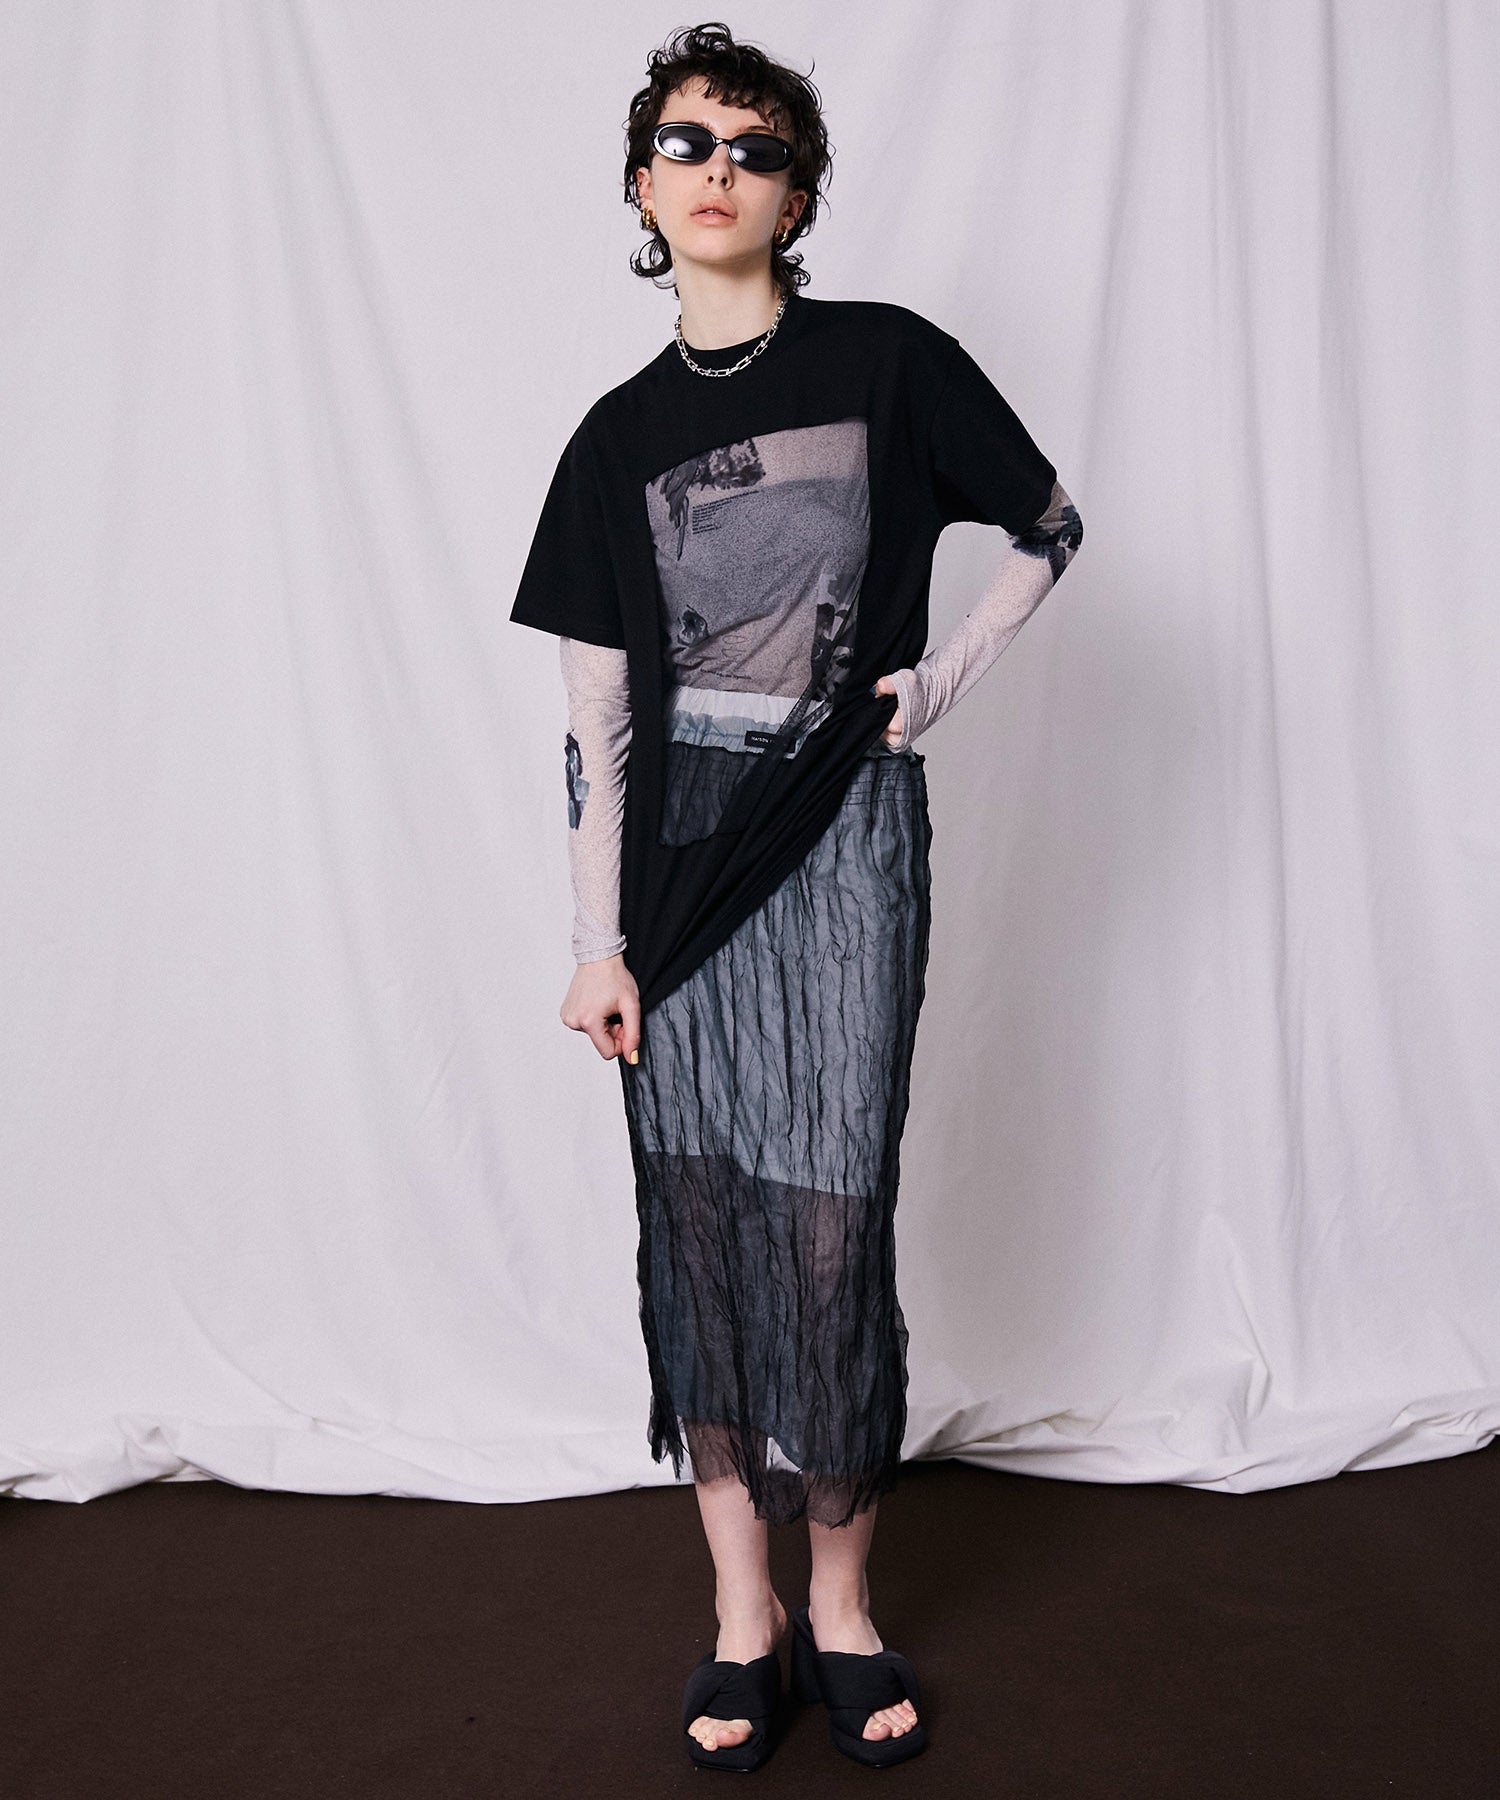 【SALE】Front Tulle T-Shirts